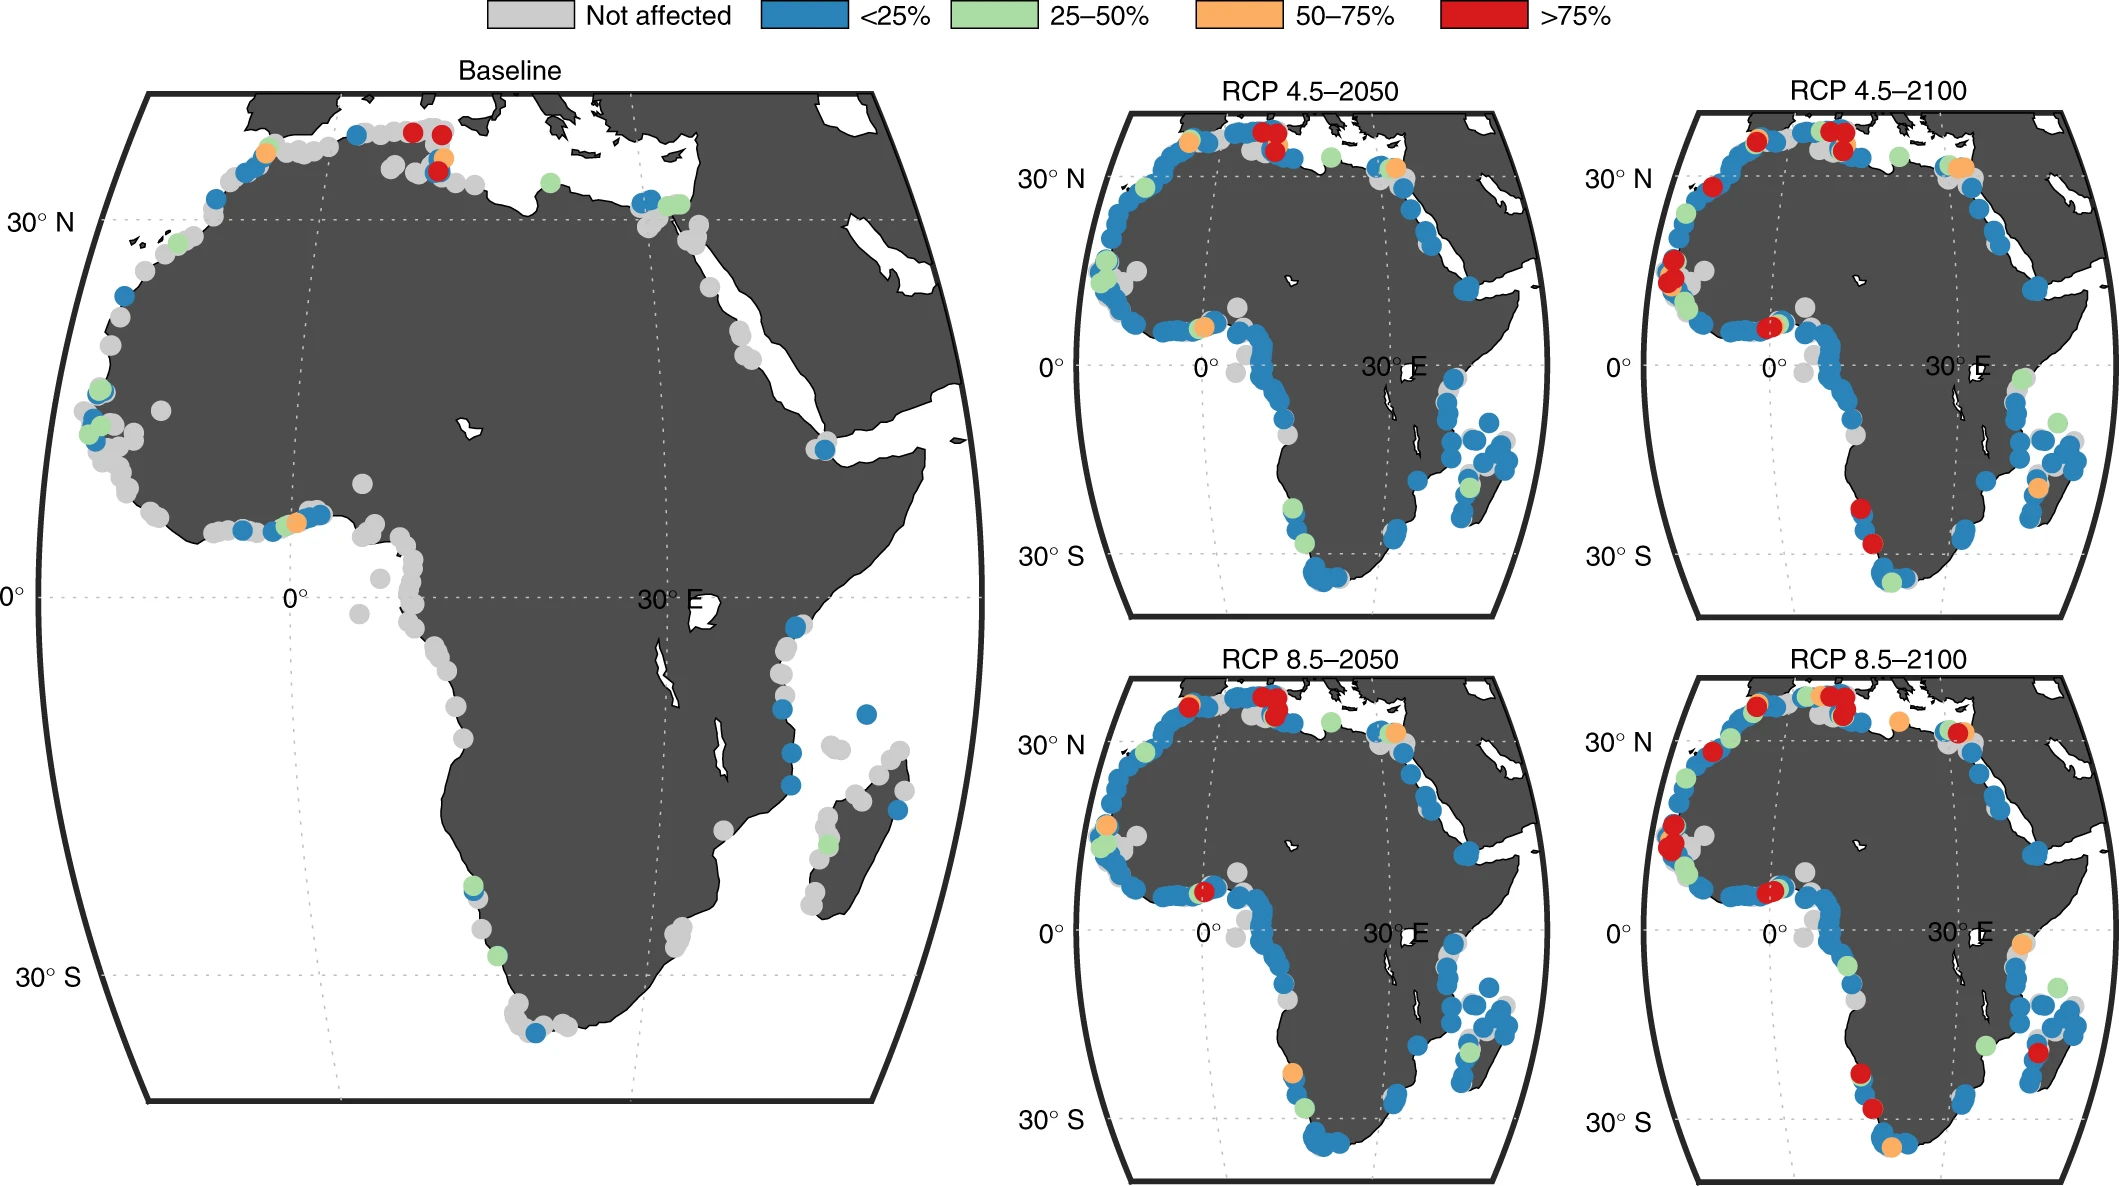 African Heritage Sites Threatened by Coastal Flooding and Erosion as Sea-Level Rise Accelerates